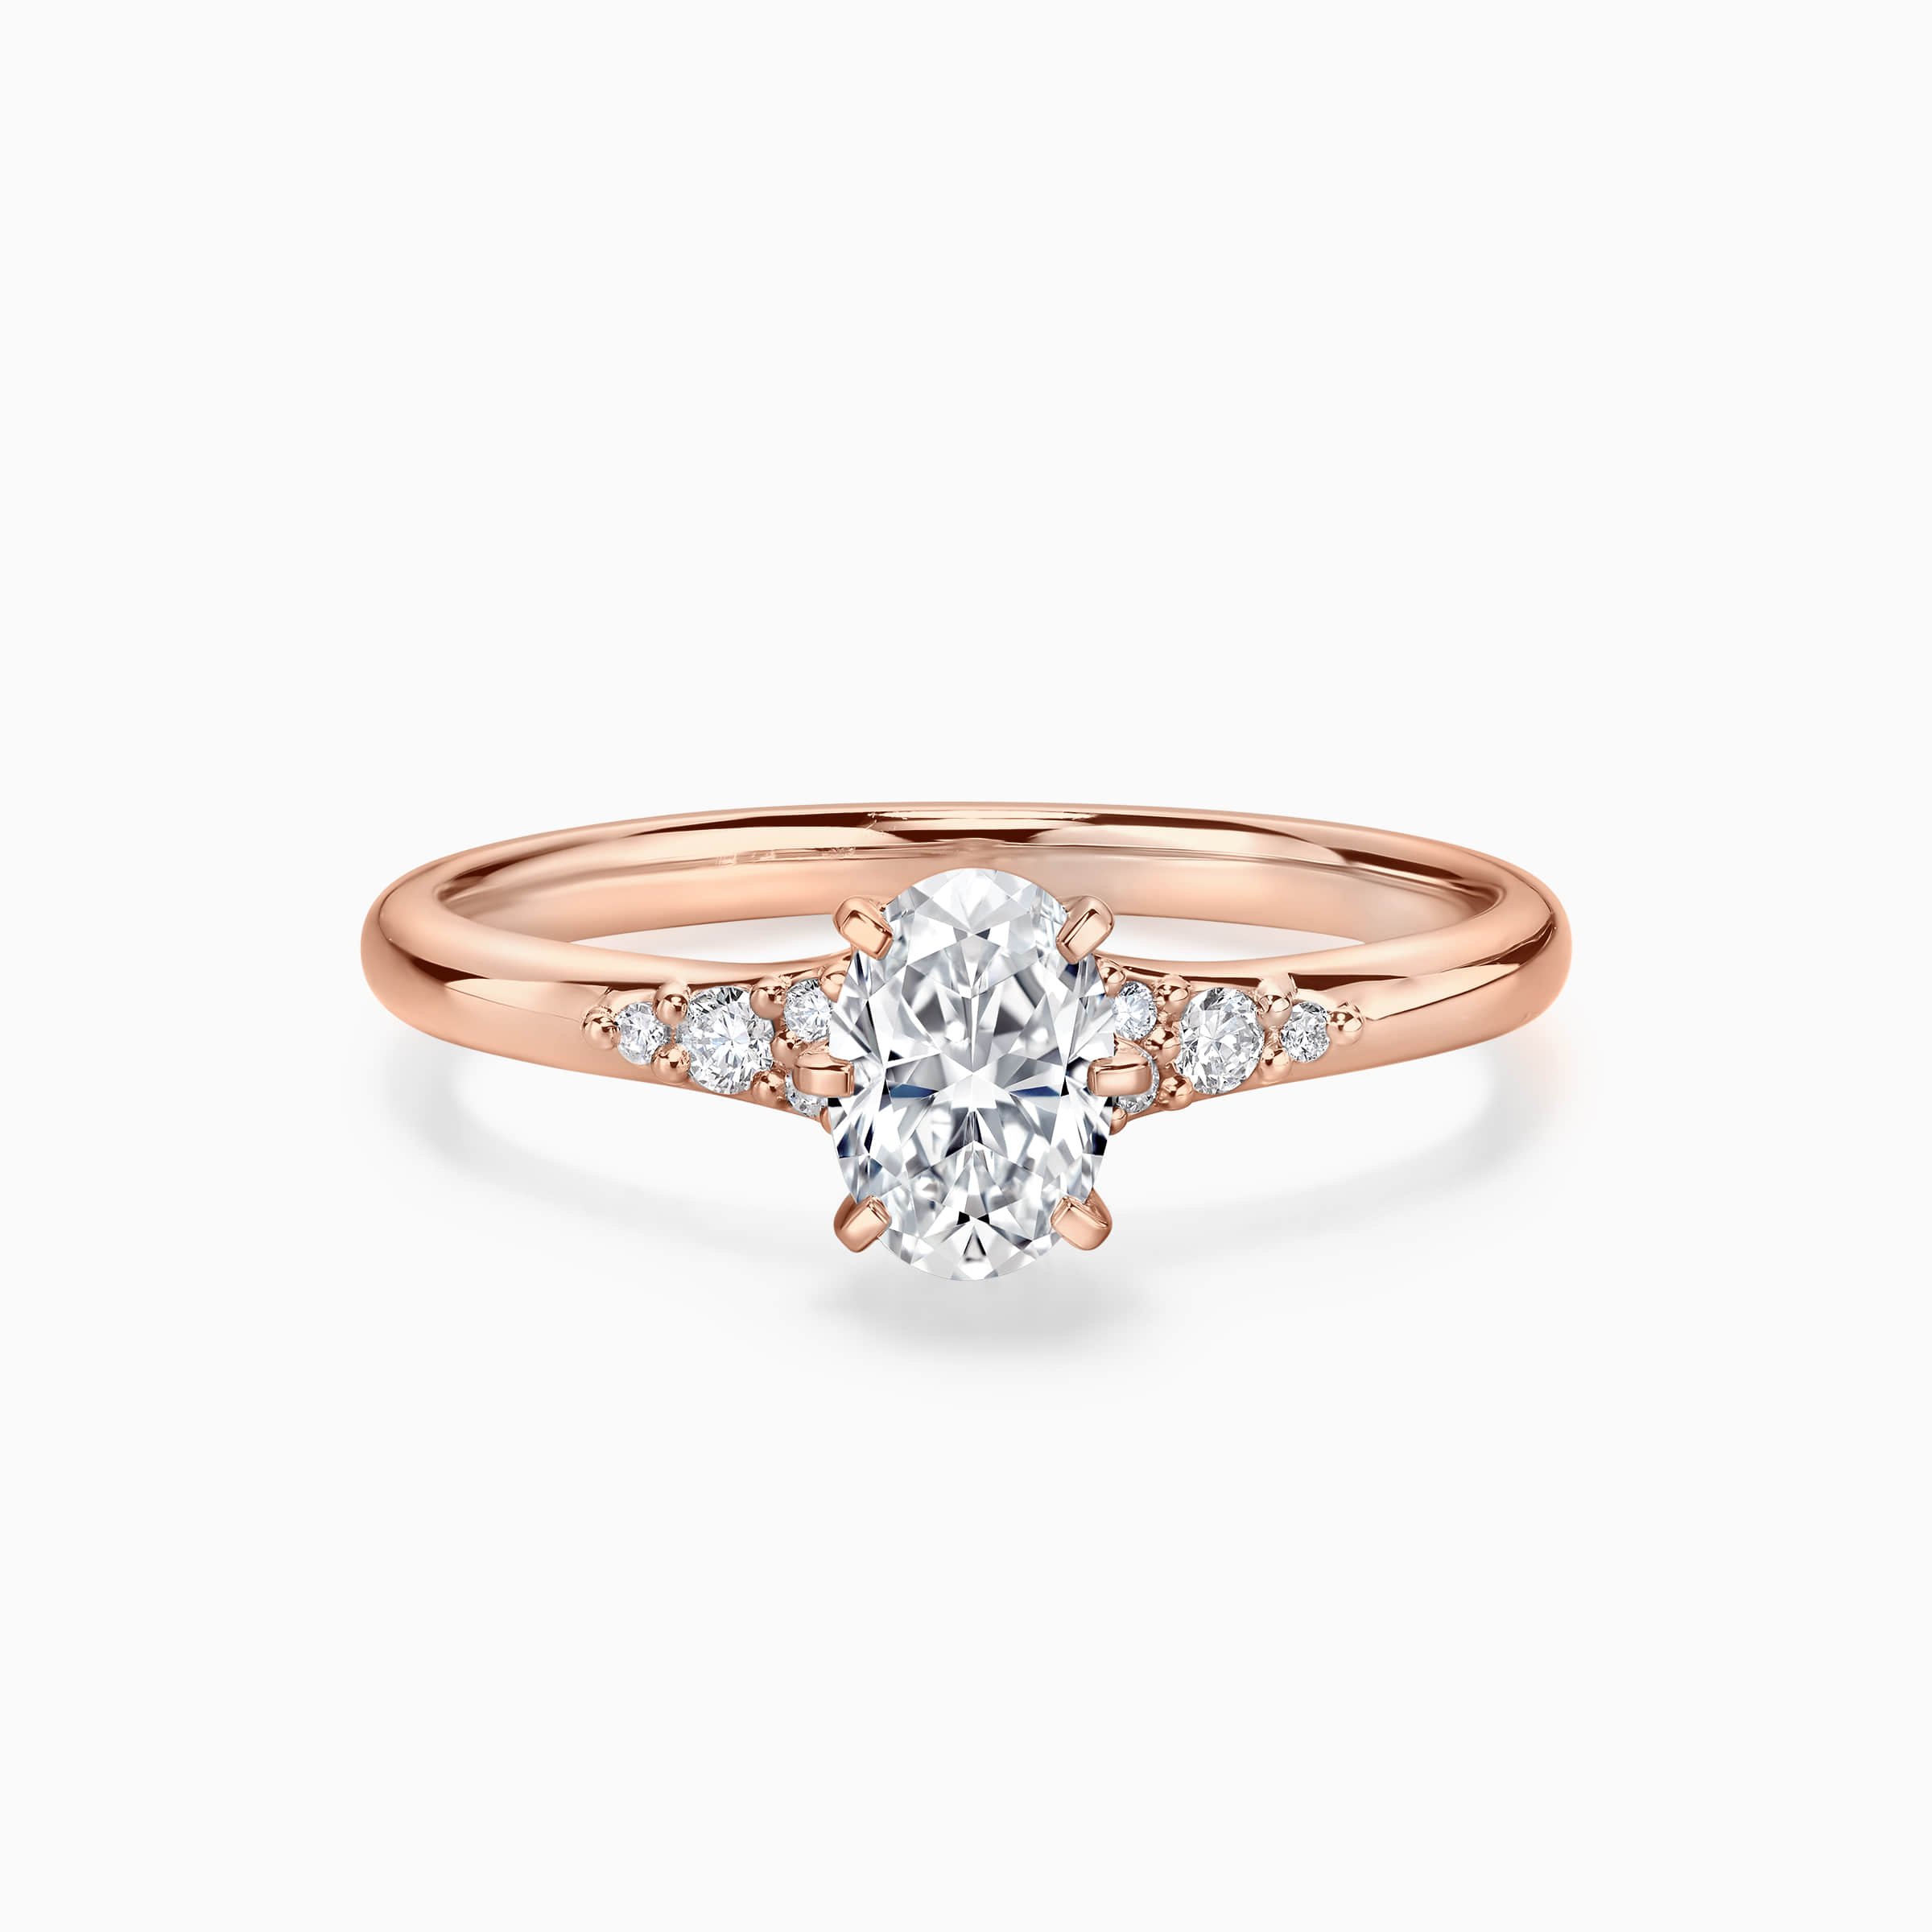 Darry Ring oval cut promise ring wirh side stones in rose gold